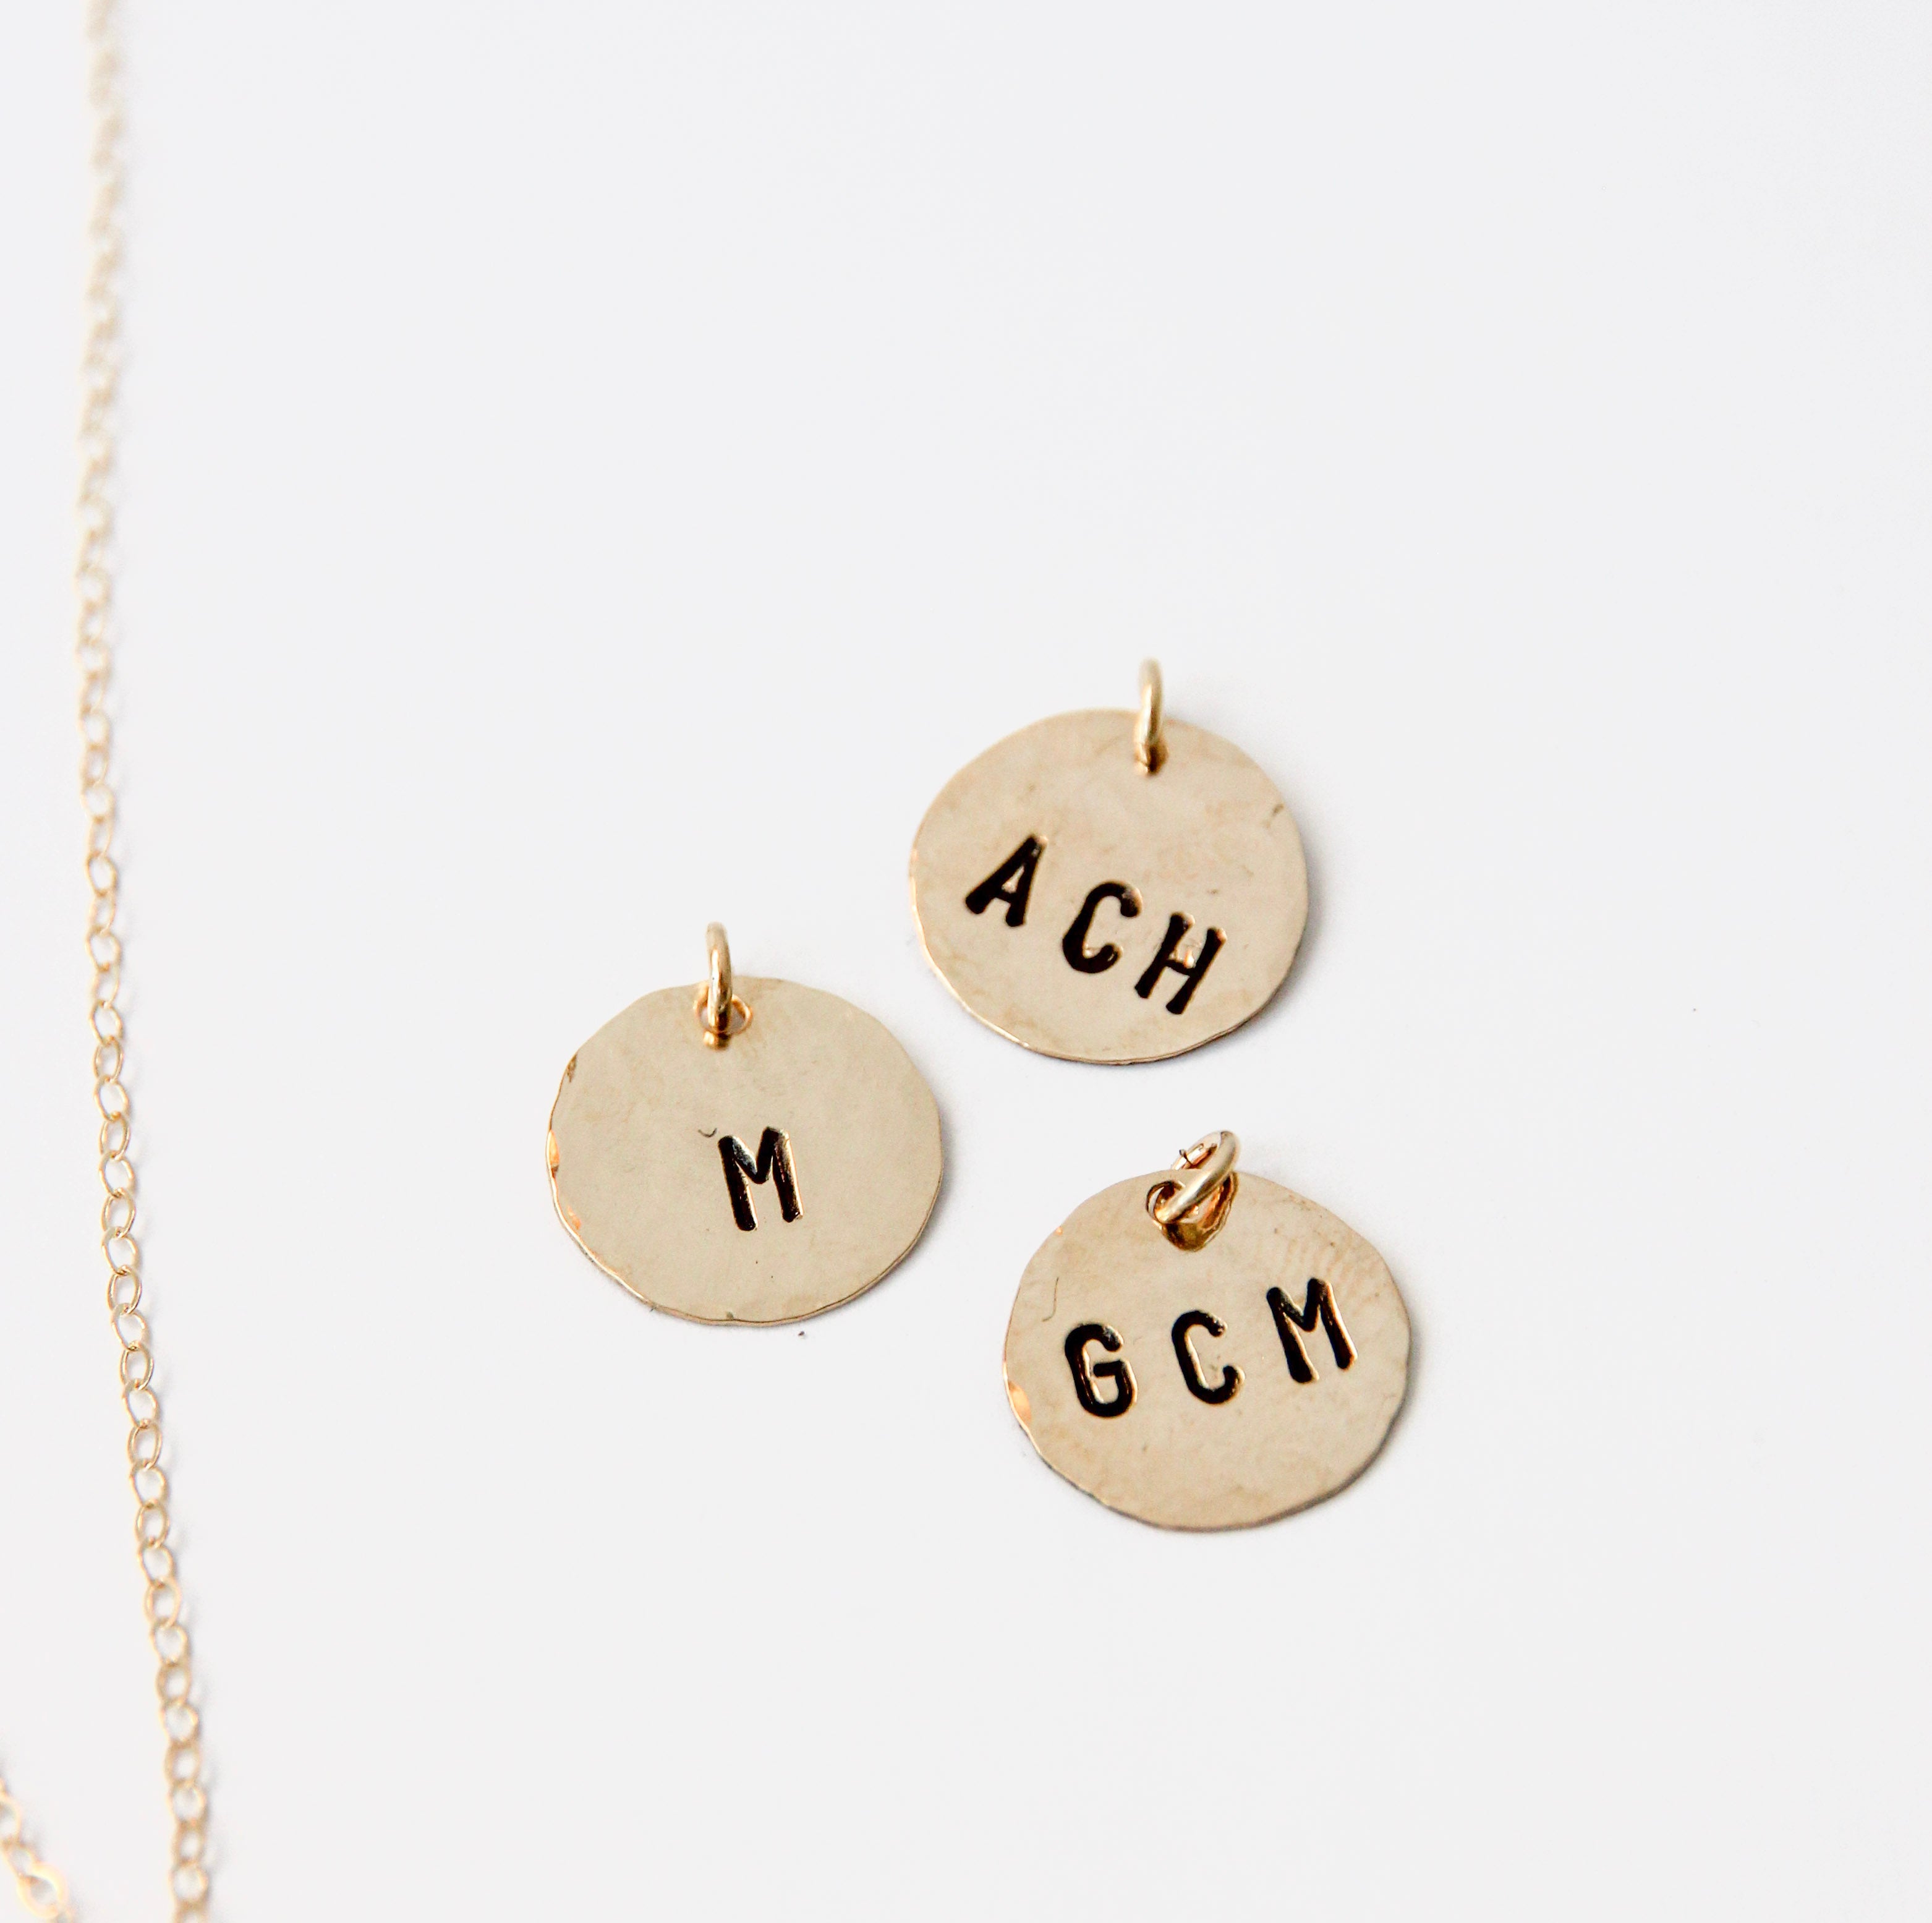 Medium size gold filled hammered circle with initials stamped onto it. Shown with three examples. 